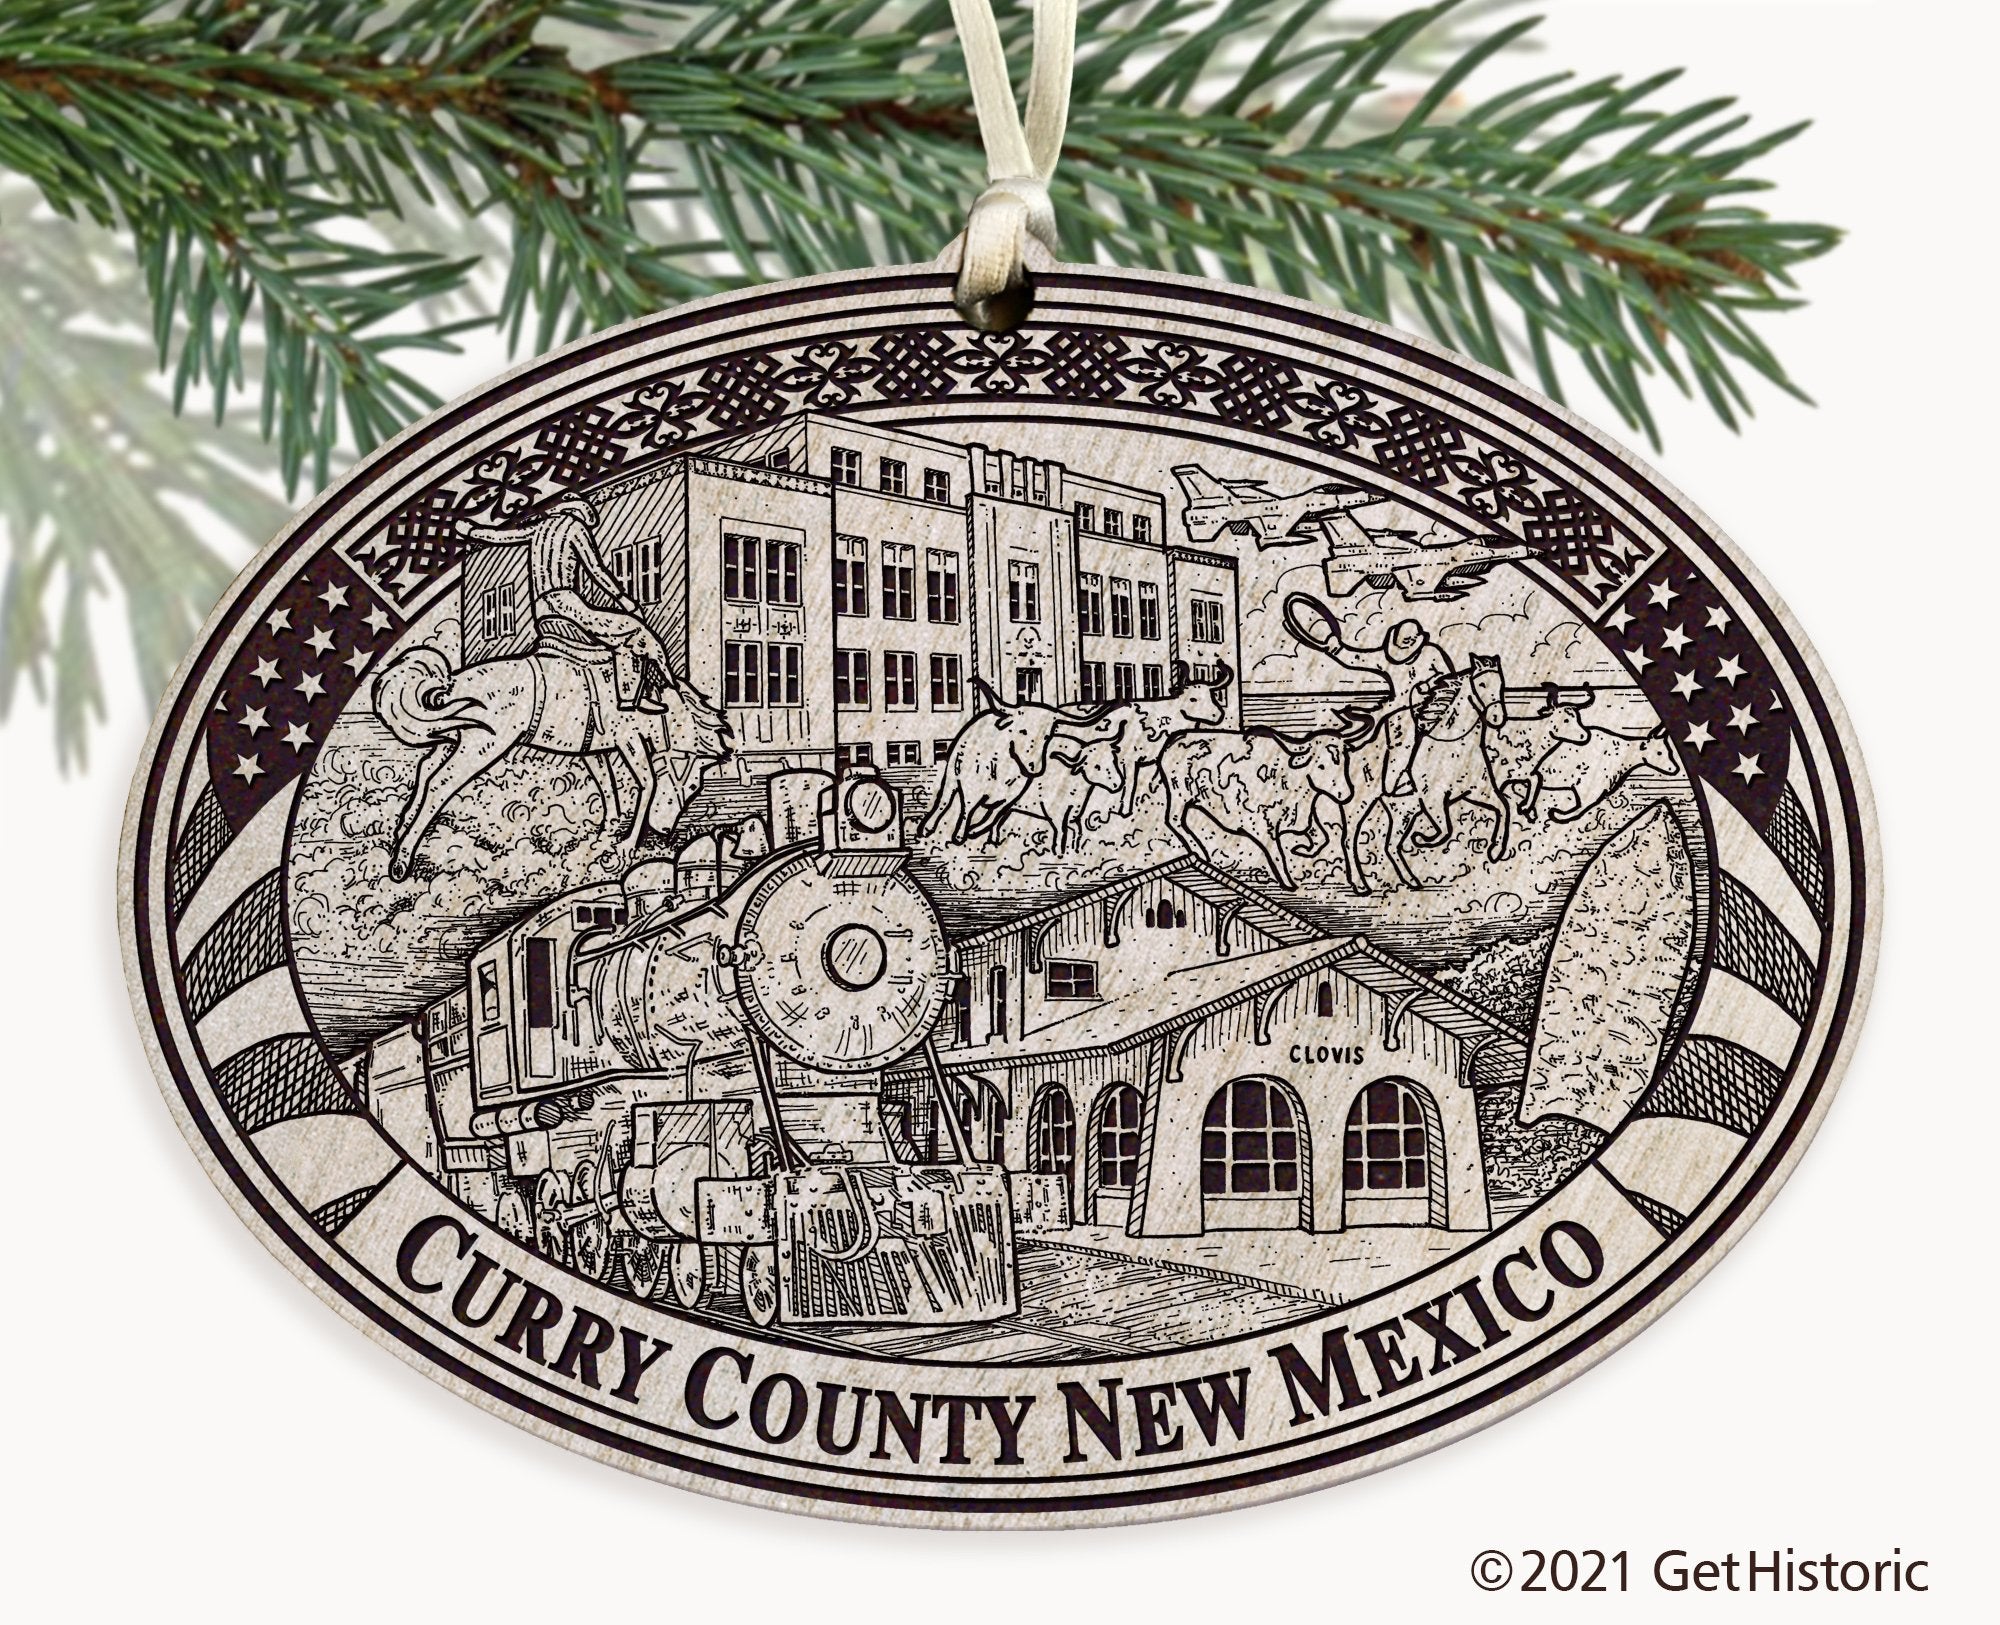 Curry County New Mexico Engraved Ornament